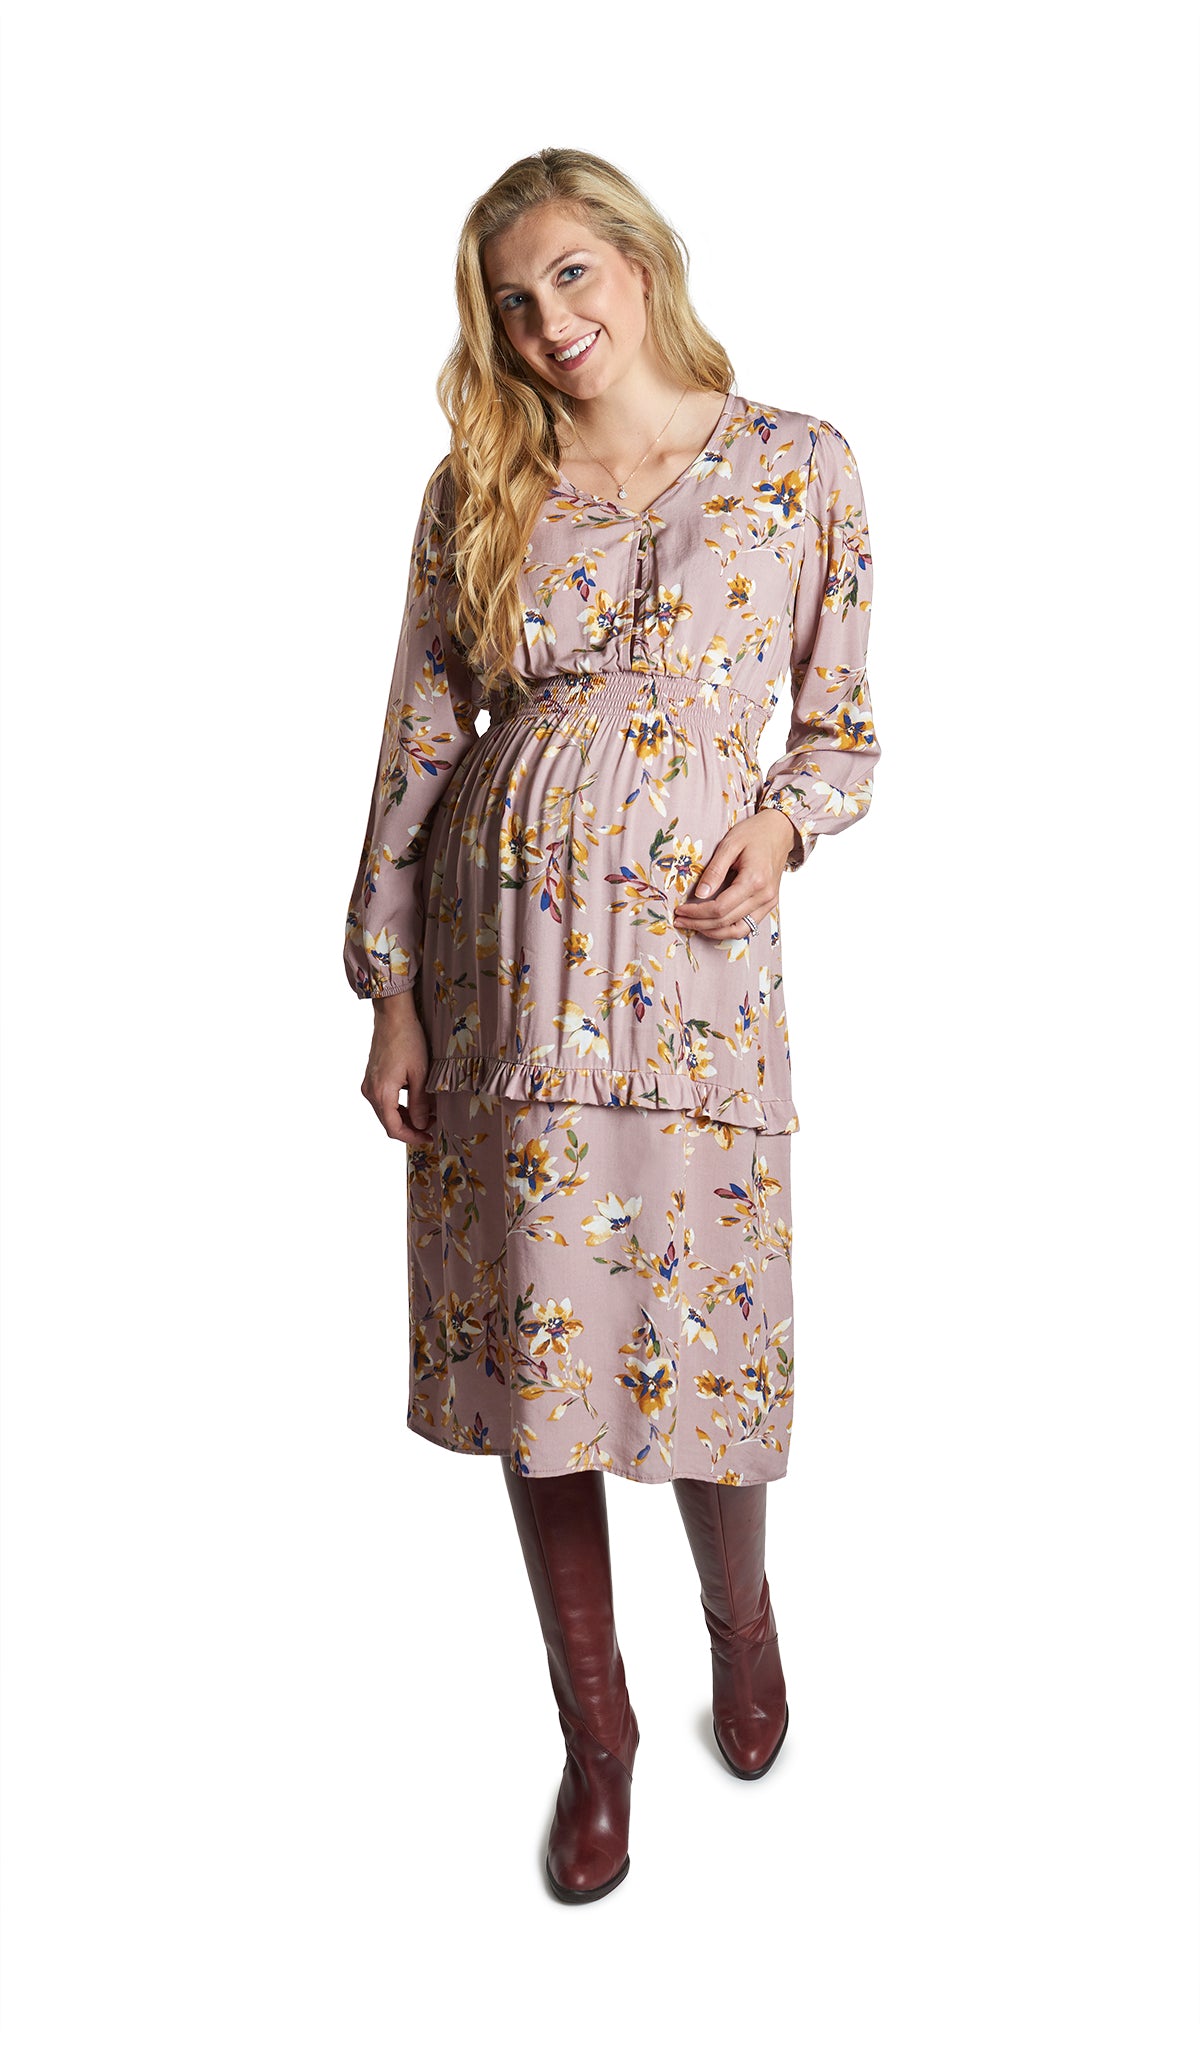 Mauve Floral Jenny Dress. Pregnant woman wearing Jenny dress and knee high burgundy boots.